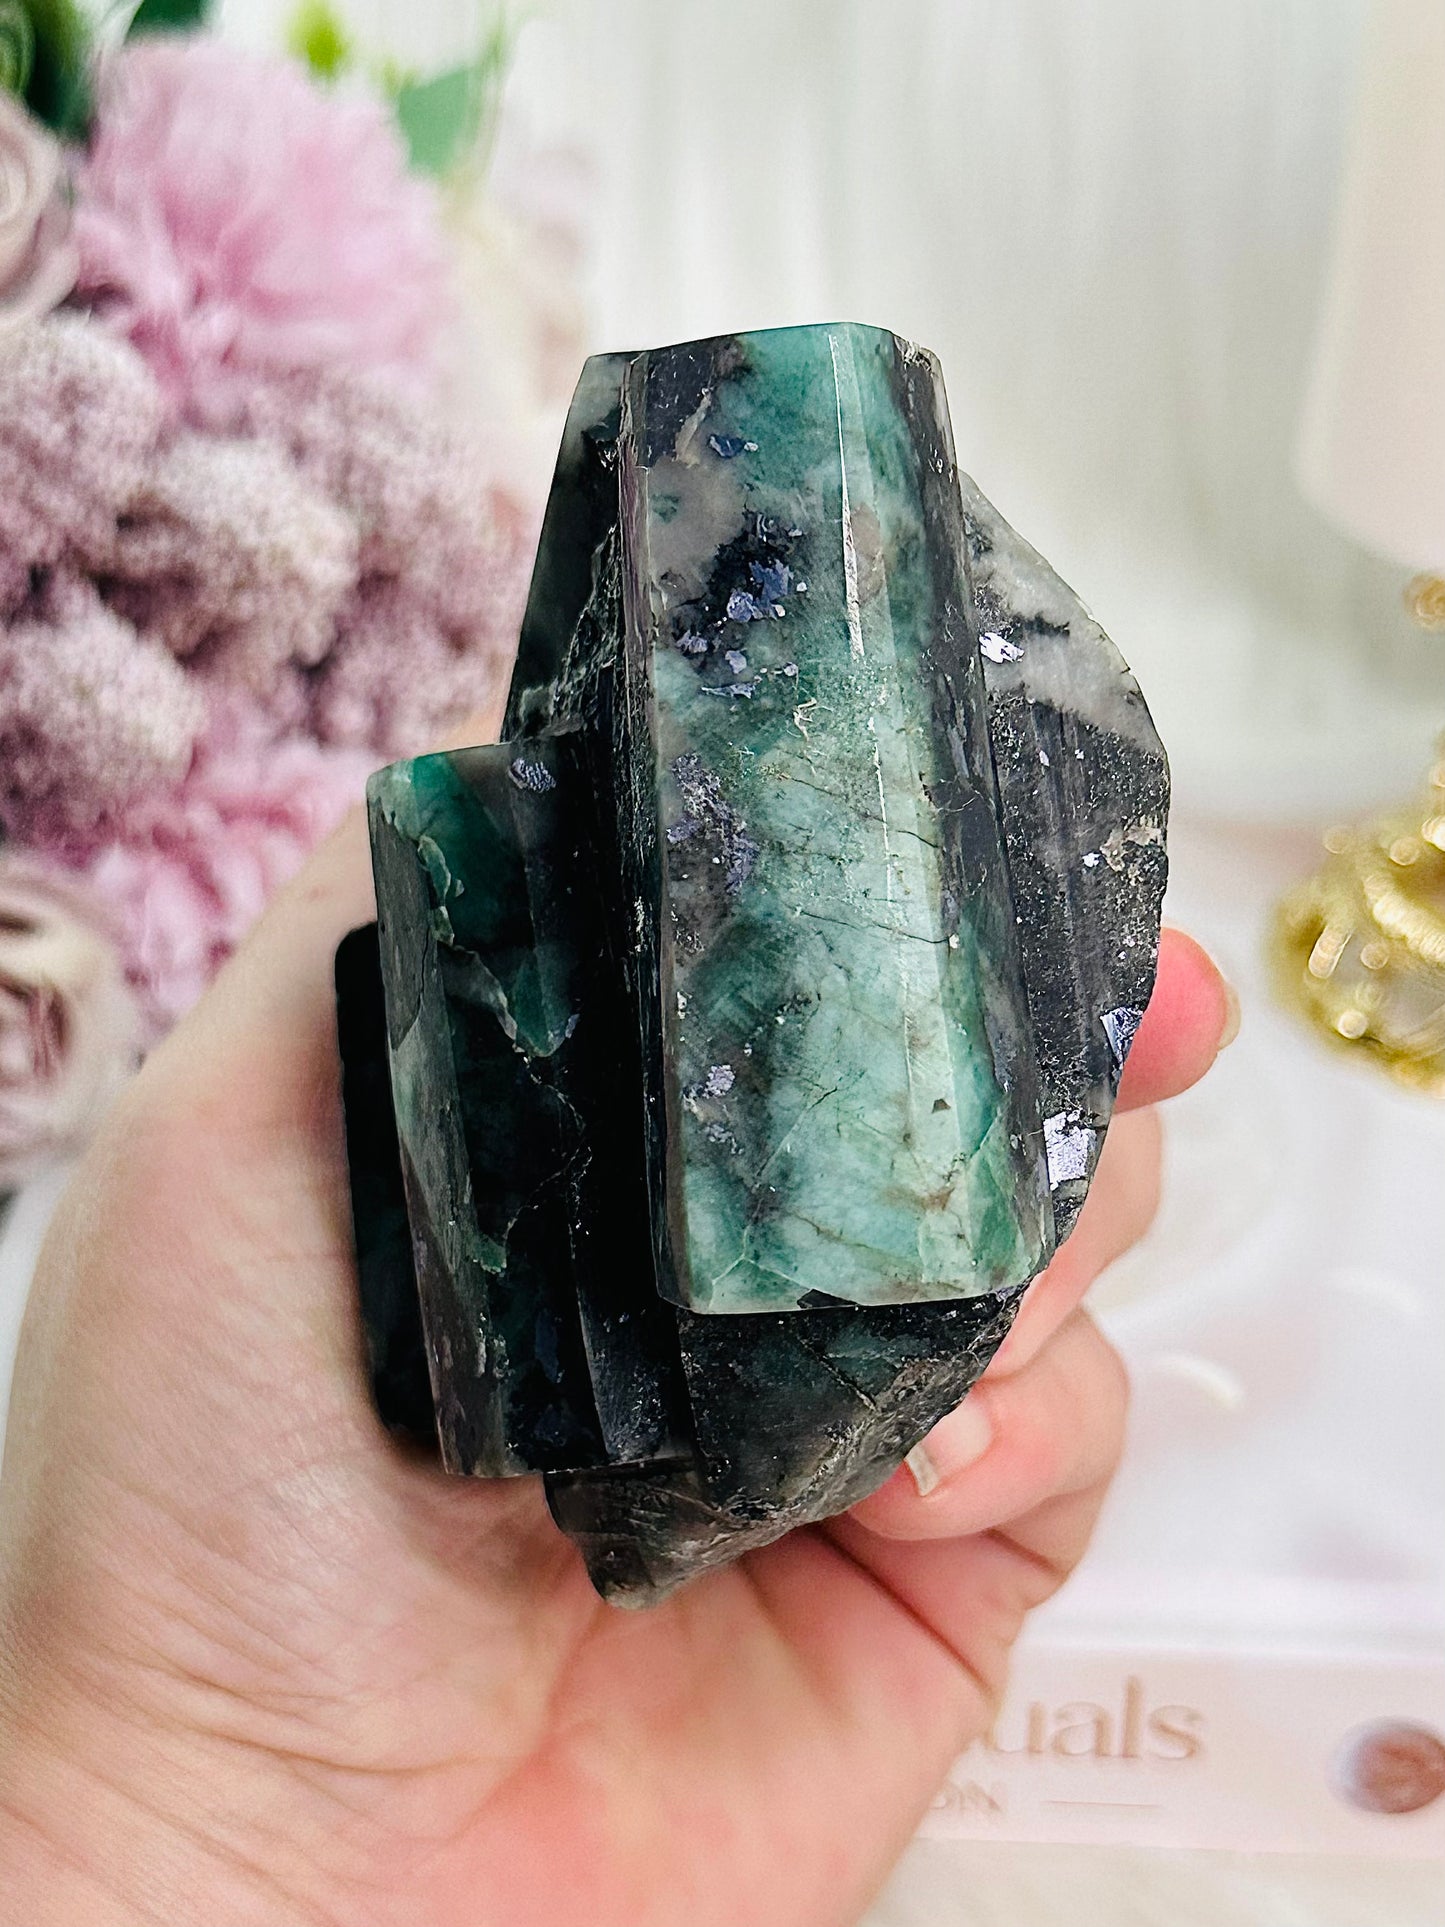 Balance & Wisdom ~ Perfect Raw Natural Emerald Specimen From Colombia